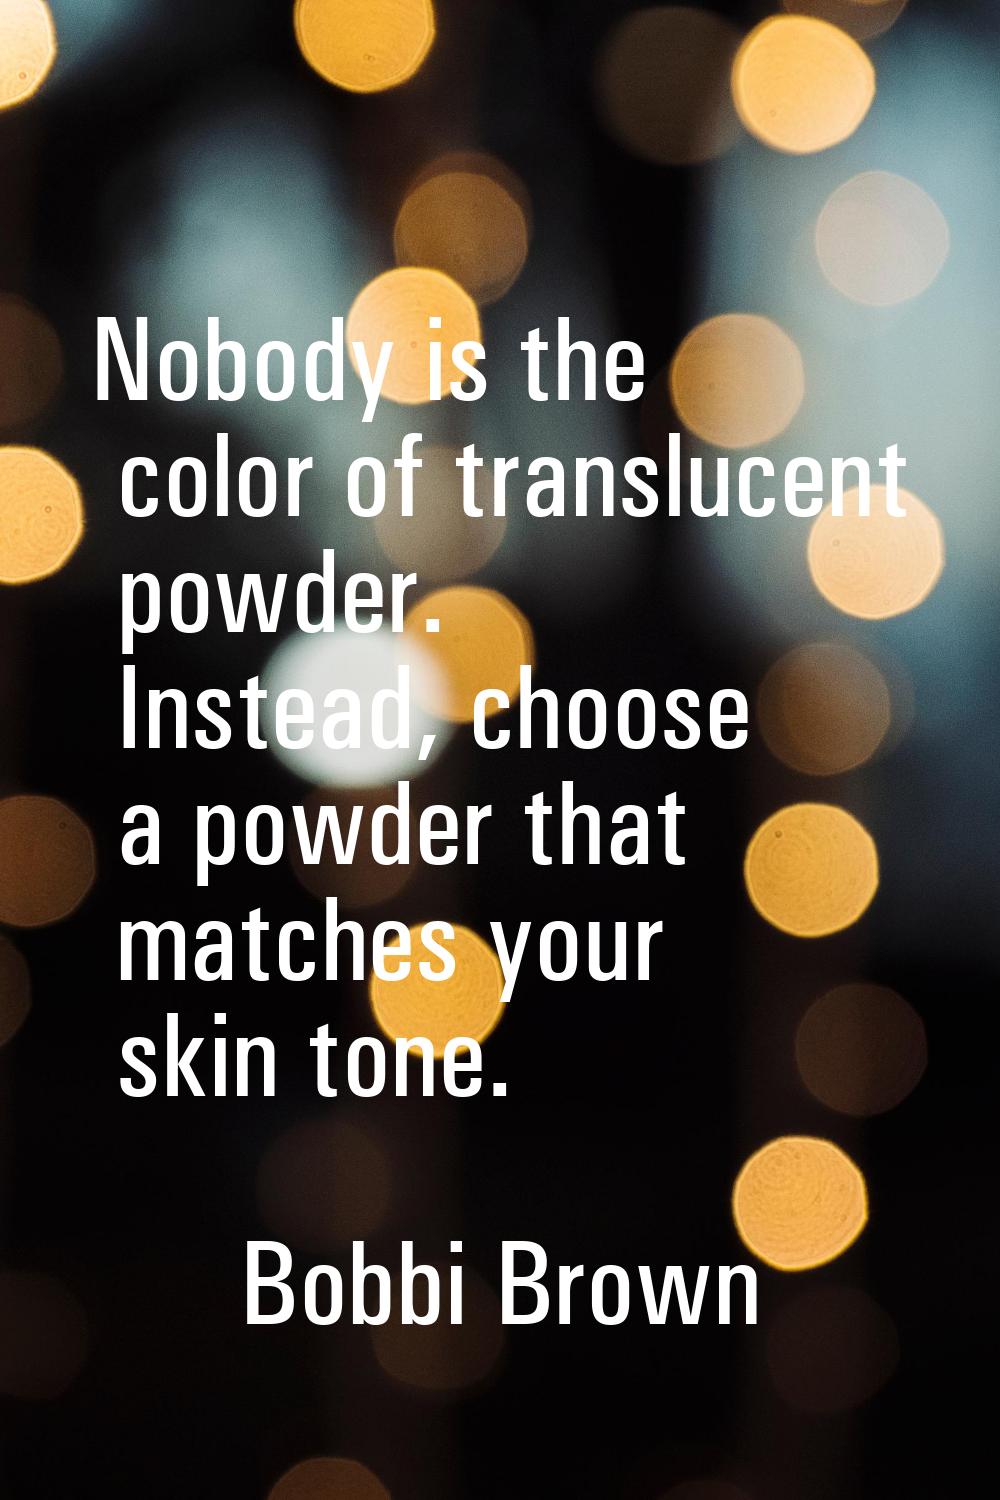 Nobody is the color of translucent powder. Instead, choose a powder that matches your skin tone.